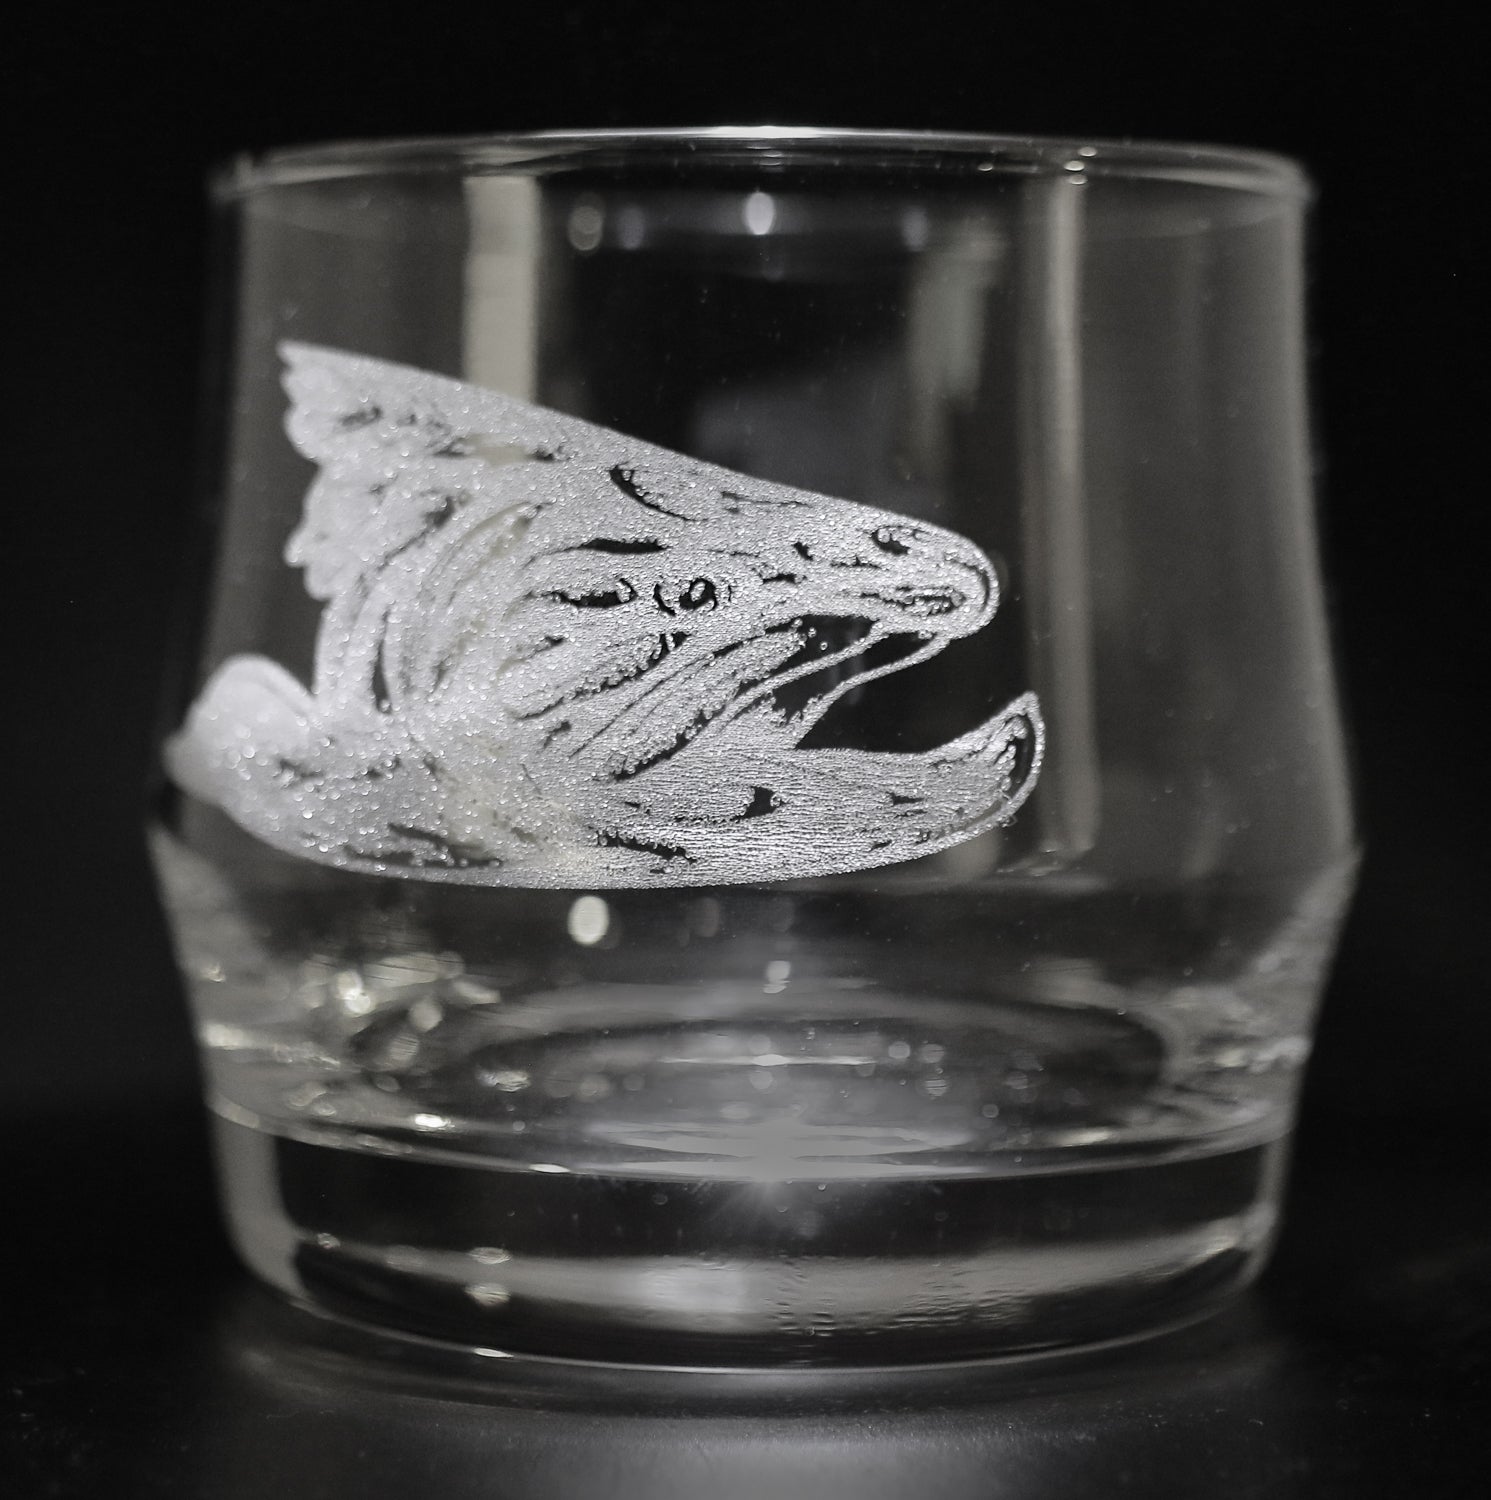 A rocks glass with a fish head made of flies etched into the side